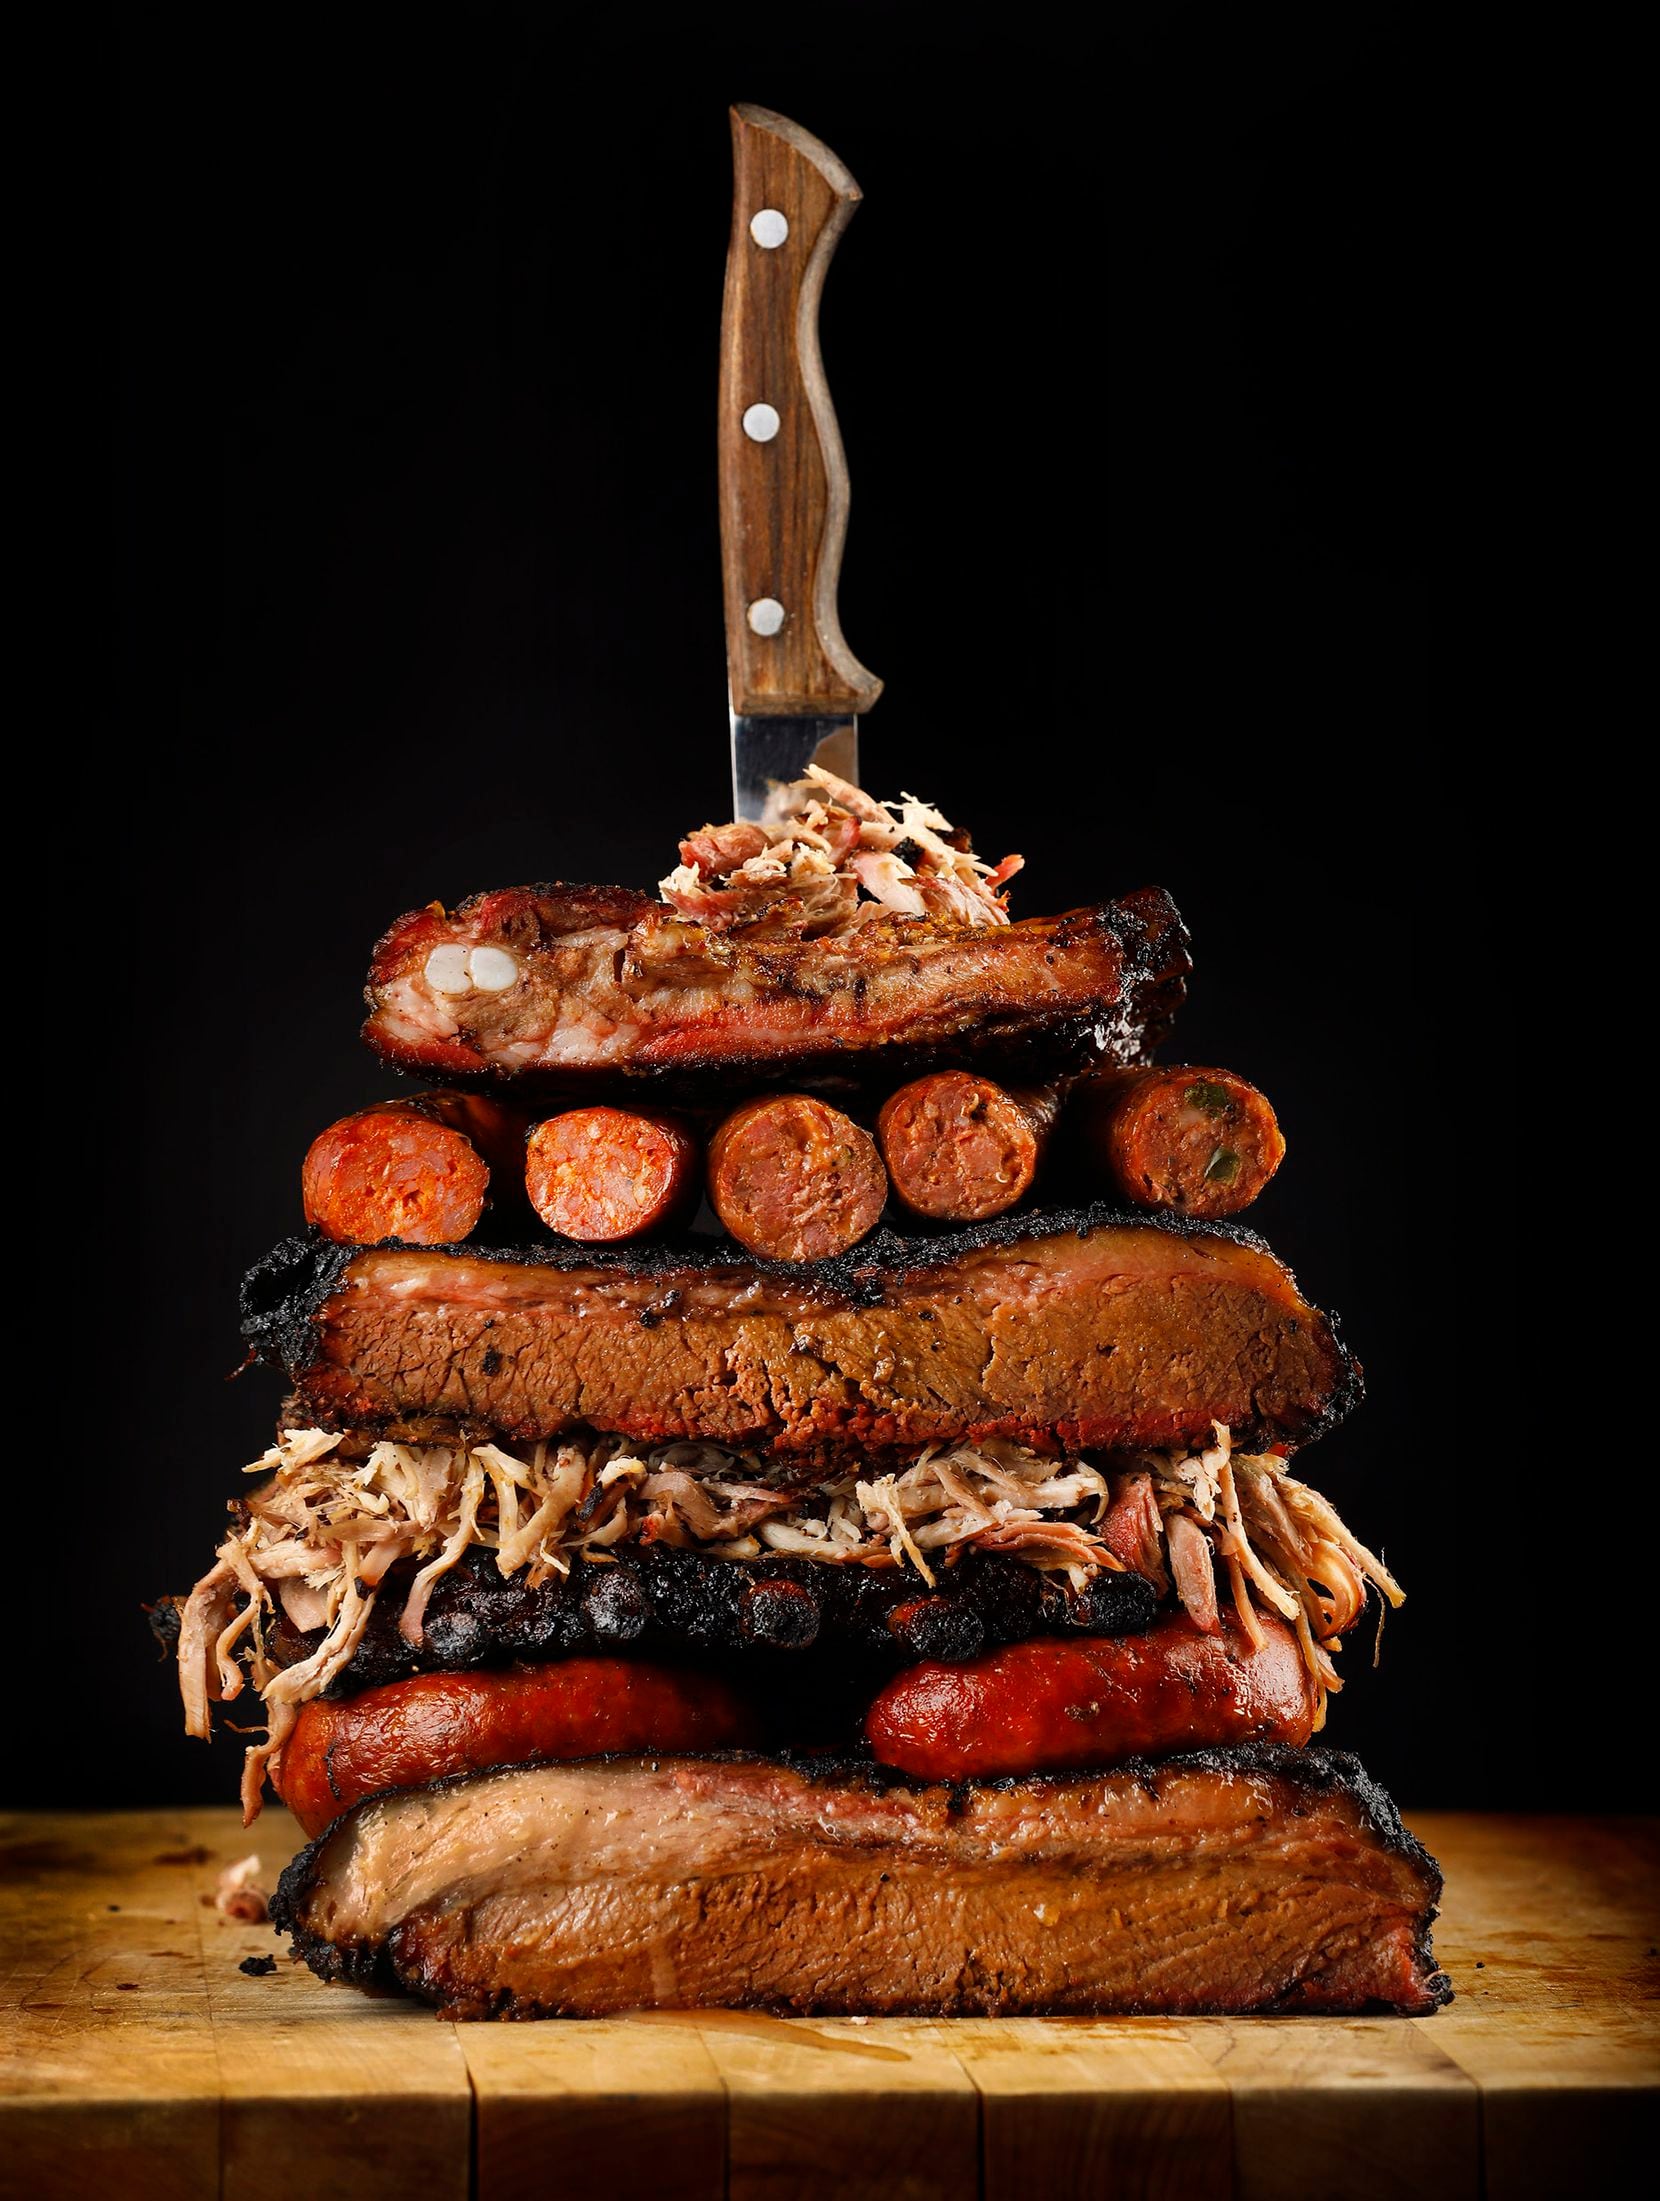 Brisket, ribs, pulled pork and sausage are among the fatty meats that could be staples of...